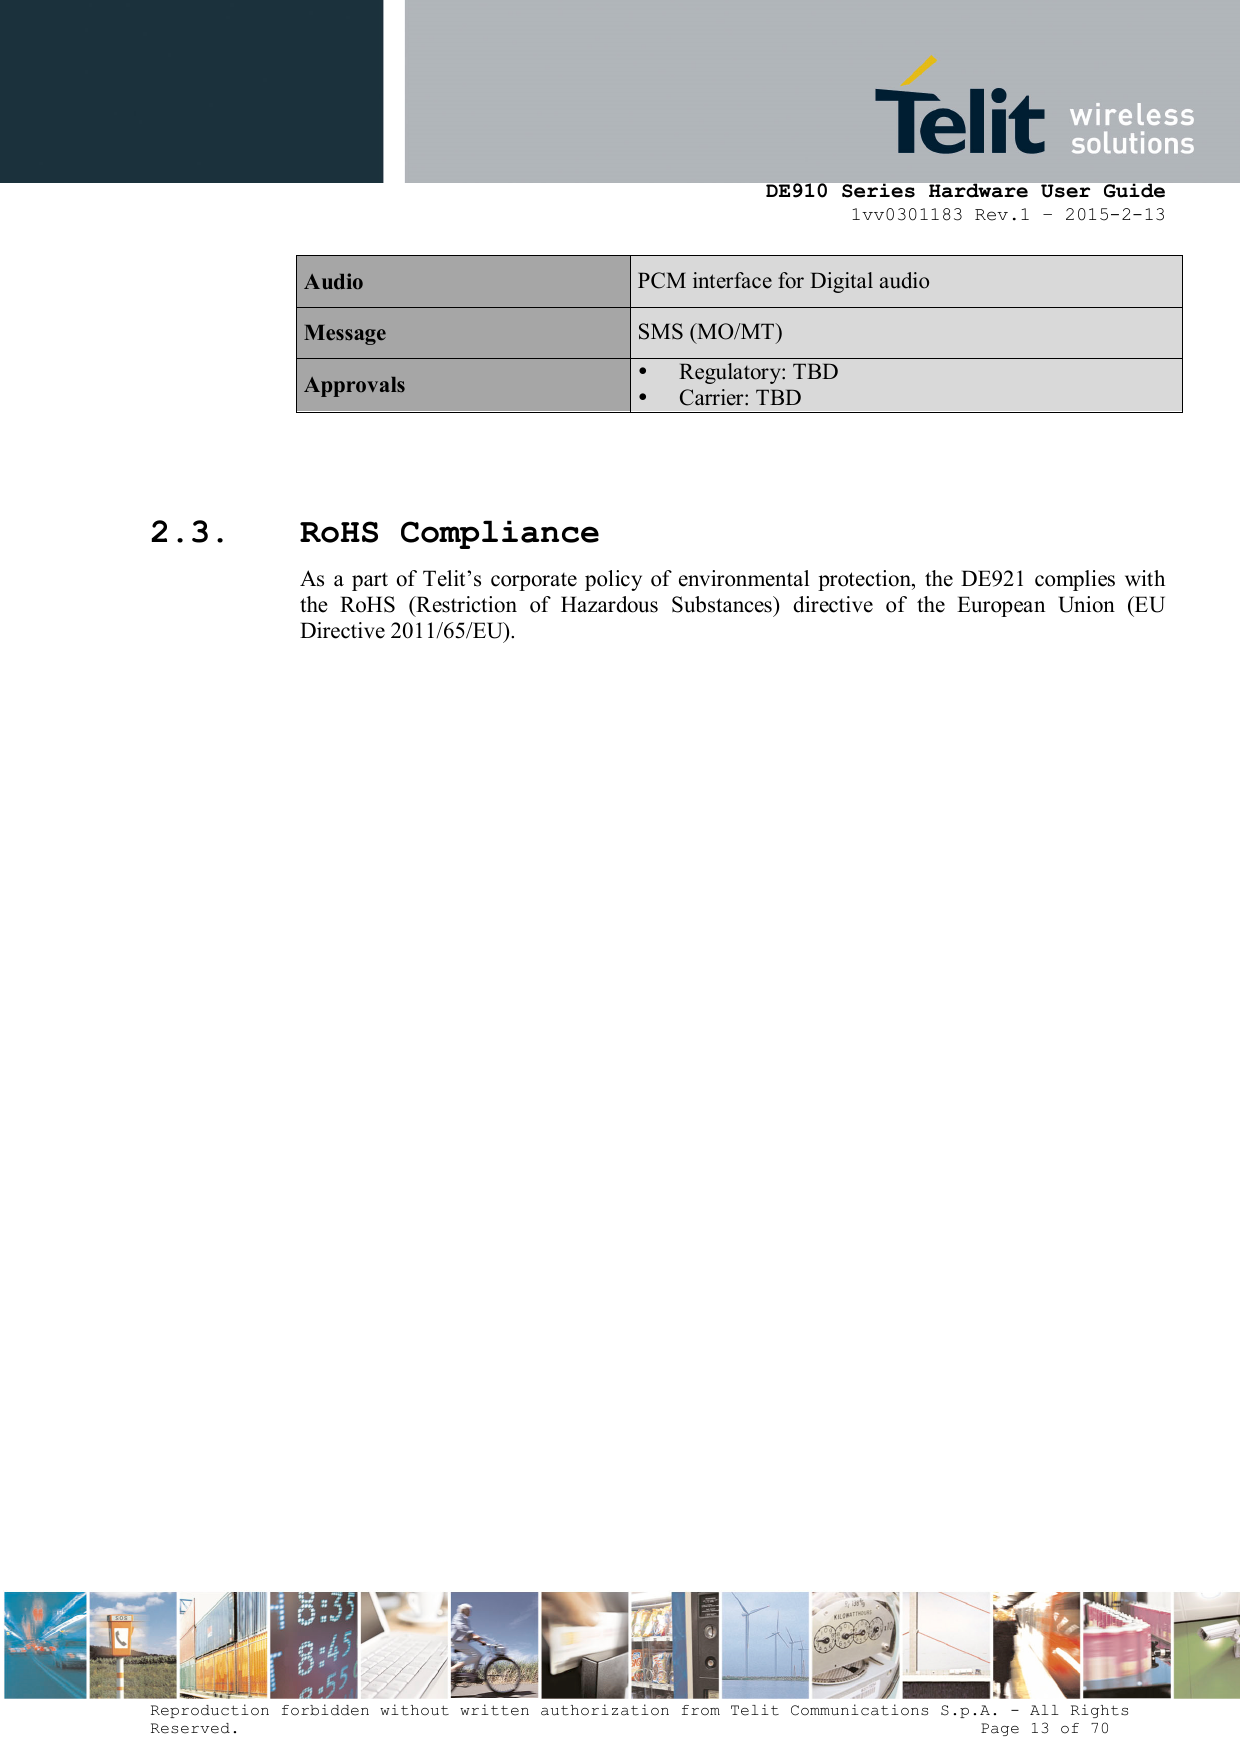      DE910 Series Hardware User Guide 1vv0301183 Rev.1 – 2015-2-13 Reproduction forbidden without written authorization from Telit Communications S.p.A. - All Rights Reserved.                                                                          Page 13 of 70 Audio  PCM interface for Digital audio Message  SMS (MO/MT) Approvals   Regulatory: TBD  Carrier: TBD    2.3. RoHS Compliance As  a part  of  Telit’s  corporate policy of  environmental  protection,  the DE921  complies with the  RoHS  (Restriction  of  Hazardous  Substances)  directive  of  the  European  Union  (EU Directive 2011/65/EU).  